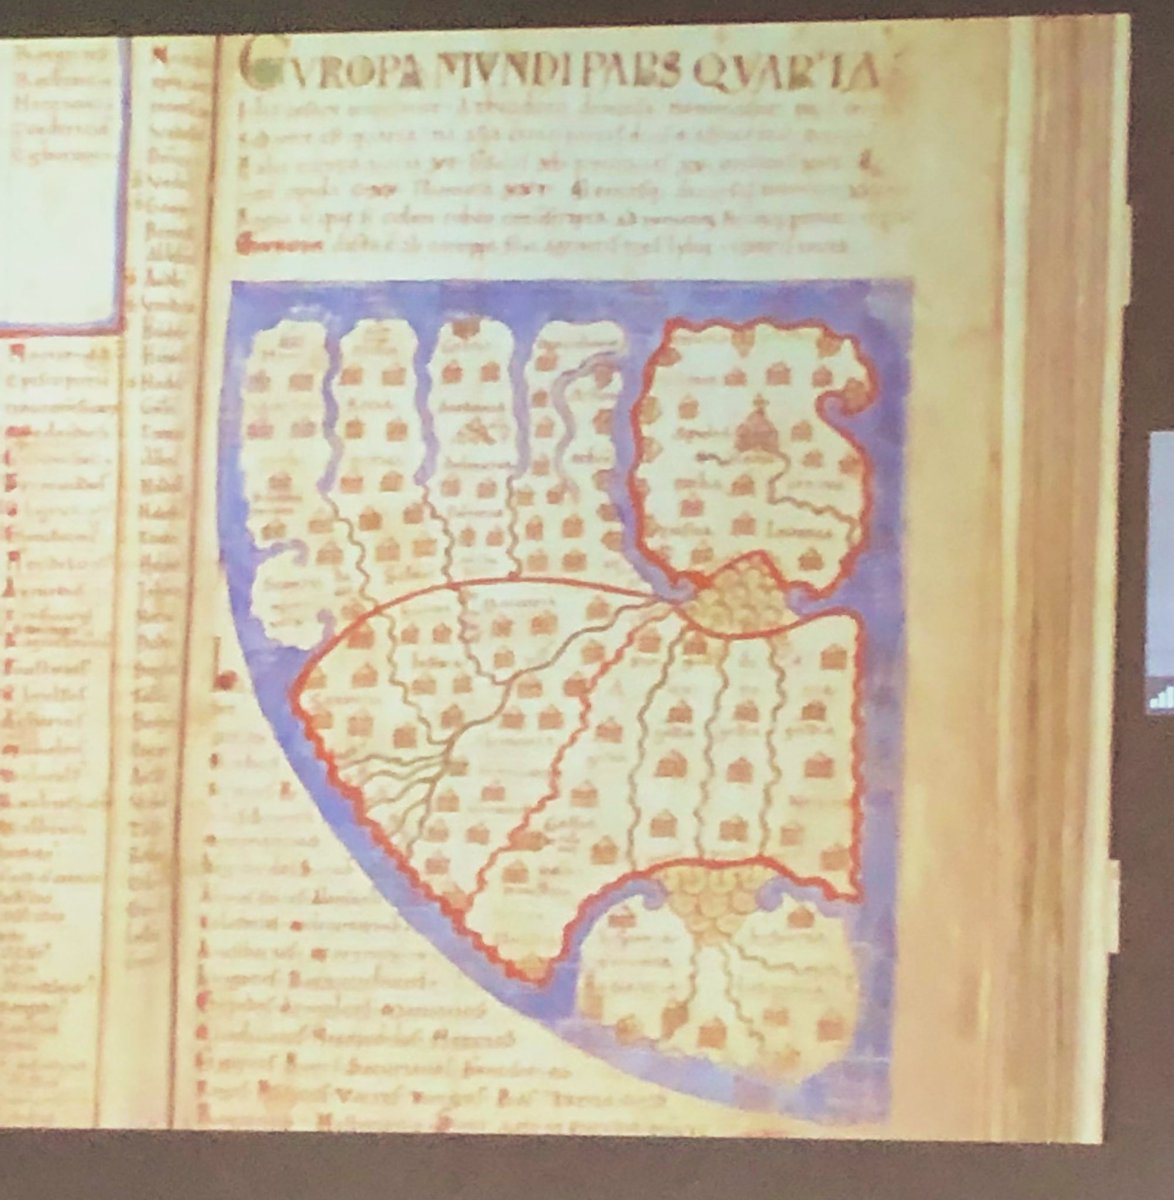 This page of the Liber floridus now in Ghent U. Is the oldest extant map of Europe. 
Karen De Coene is taking us on a fascinating deep dive into this work at #IMCoS_symposium at KBR